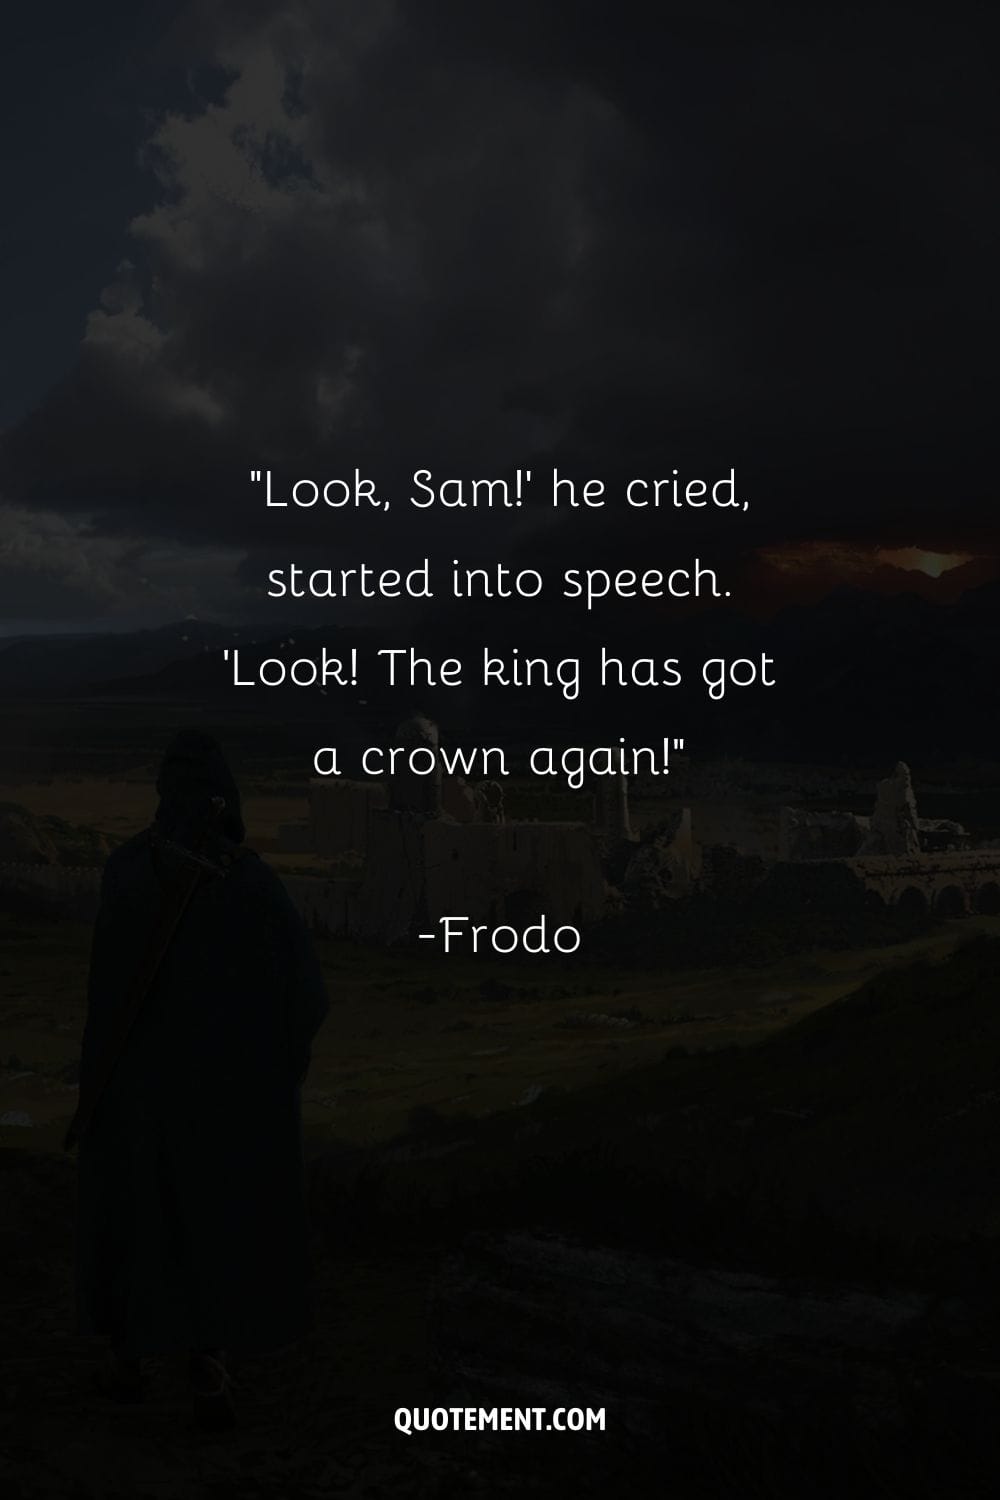 Look, Sam!' he cried, started into speech. 'Look! The king has got a crown again!